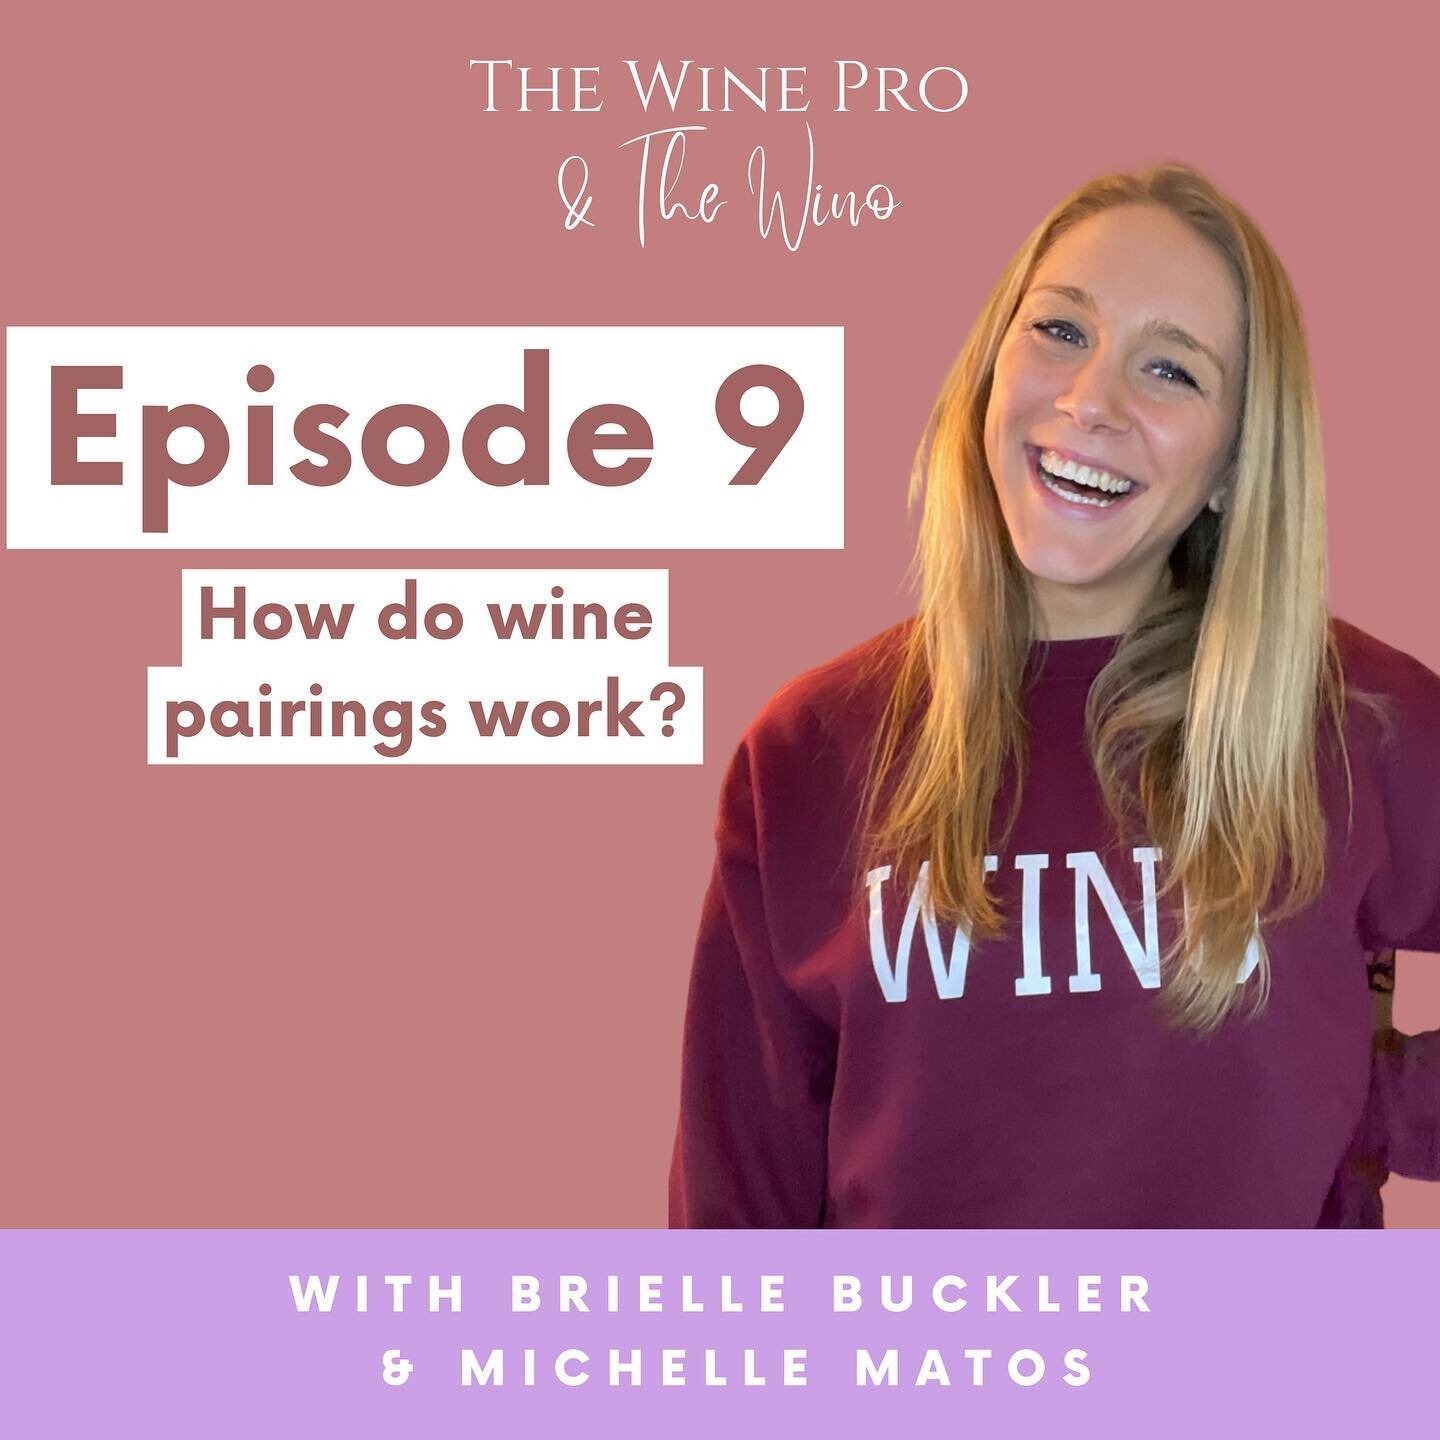 🚨 Episode 9 is live 🚨

In this week&rsquo;s episode we explore why certain wine pairings are &ldquo;recommended&rdquo; on wine lists and by sommeliers&hellip;and we also attest that whatever your wine-pairing preference, you&rsquo;re right! We samp